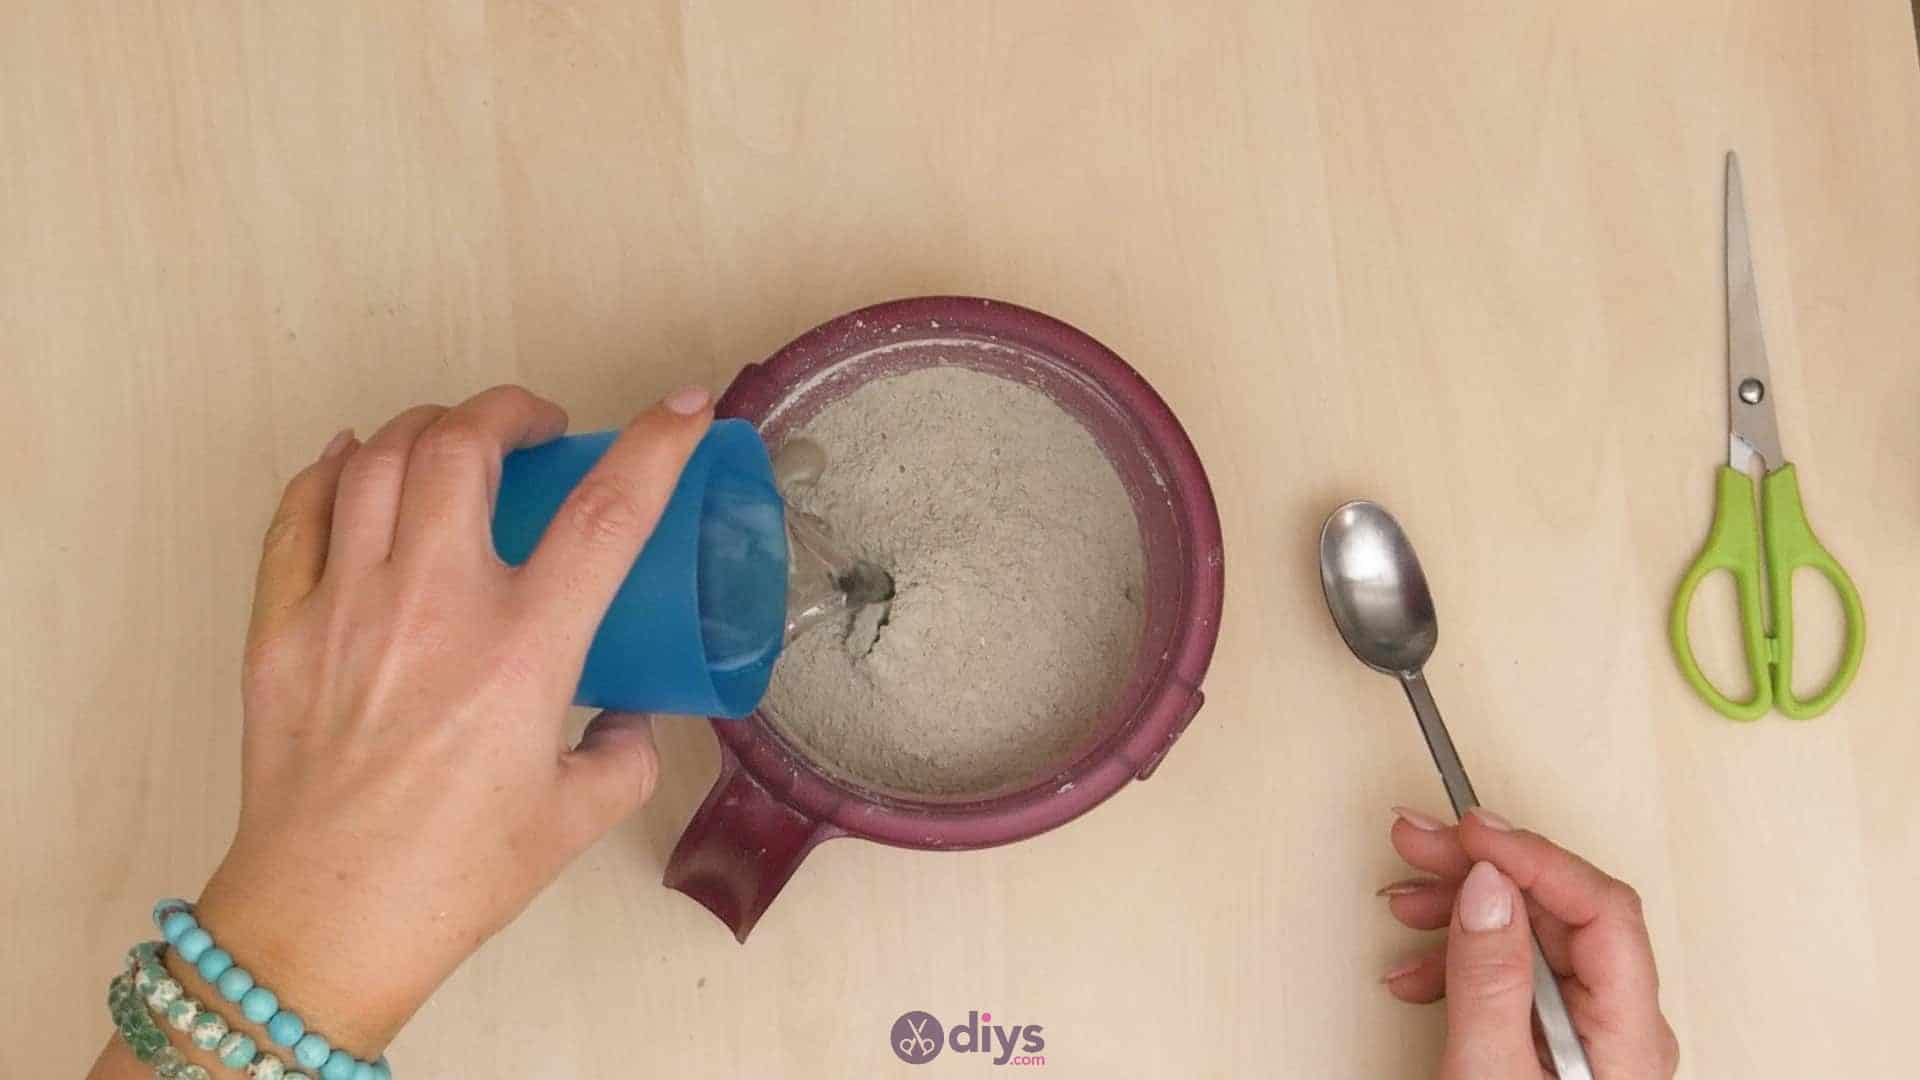 Diy concrete candle holder plate step 1